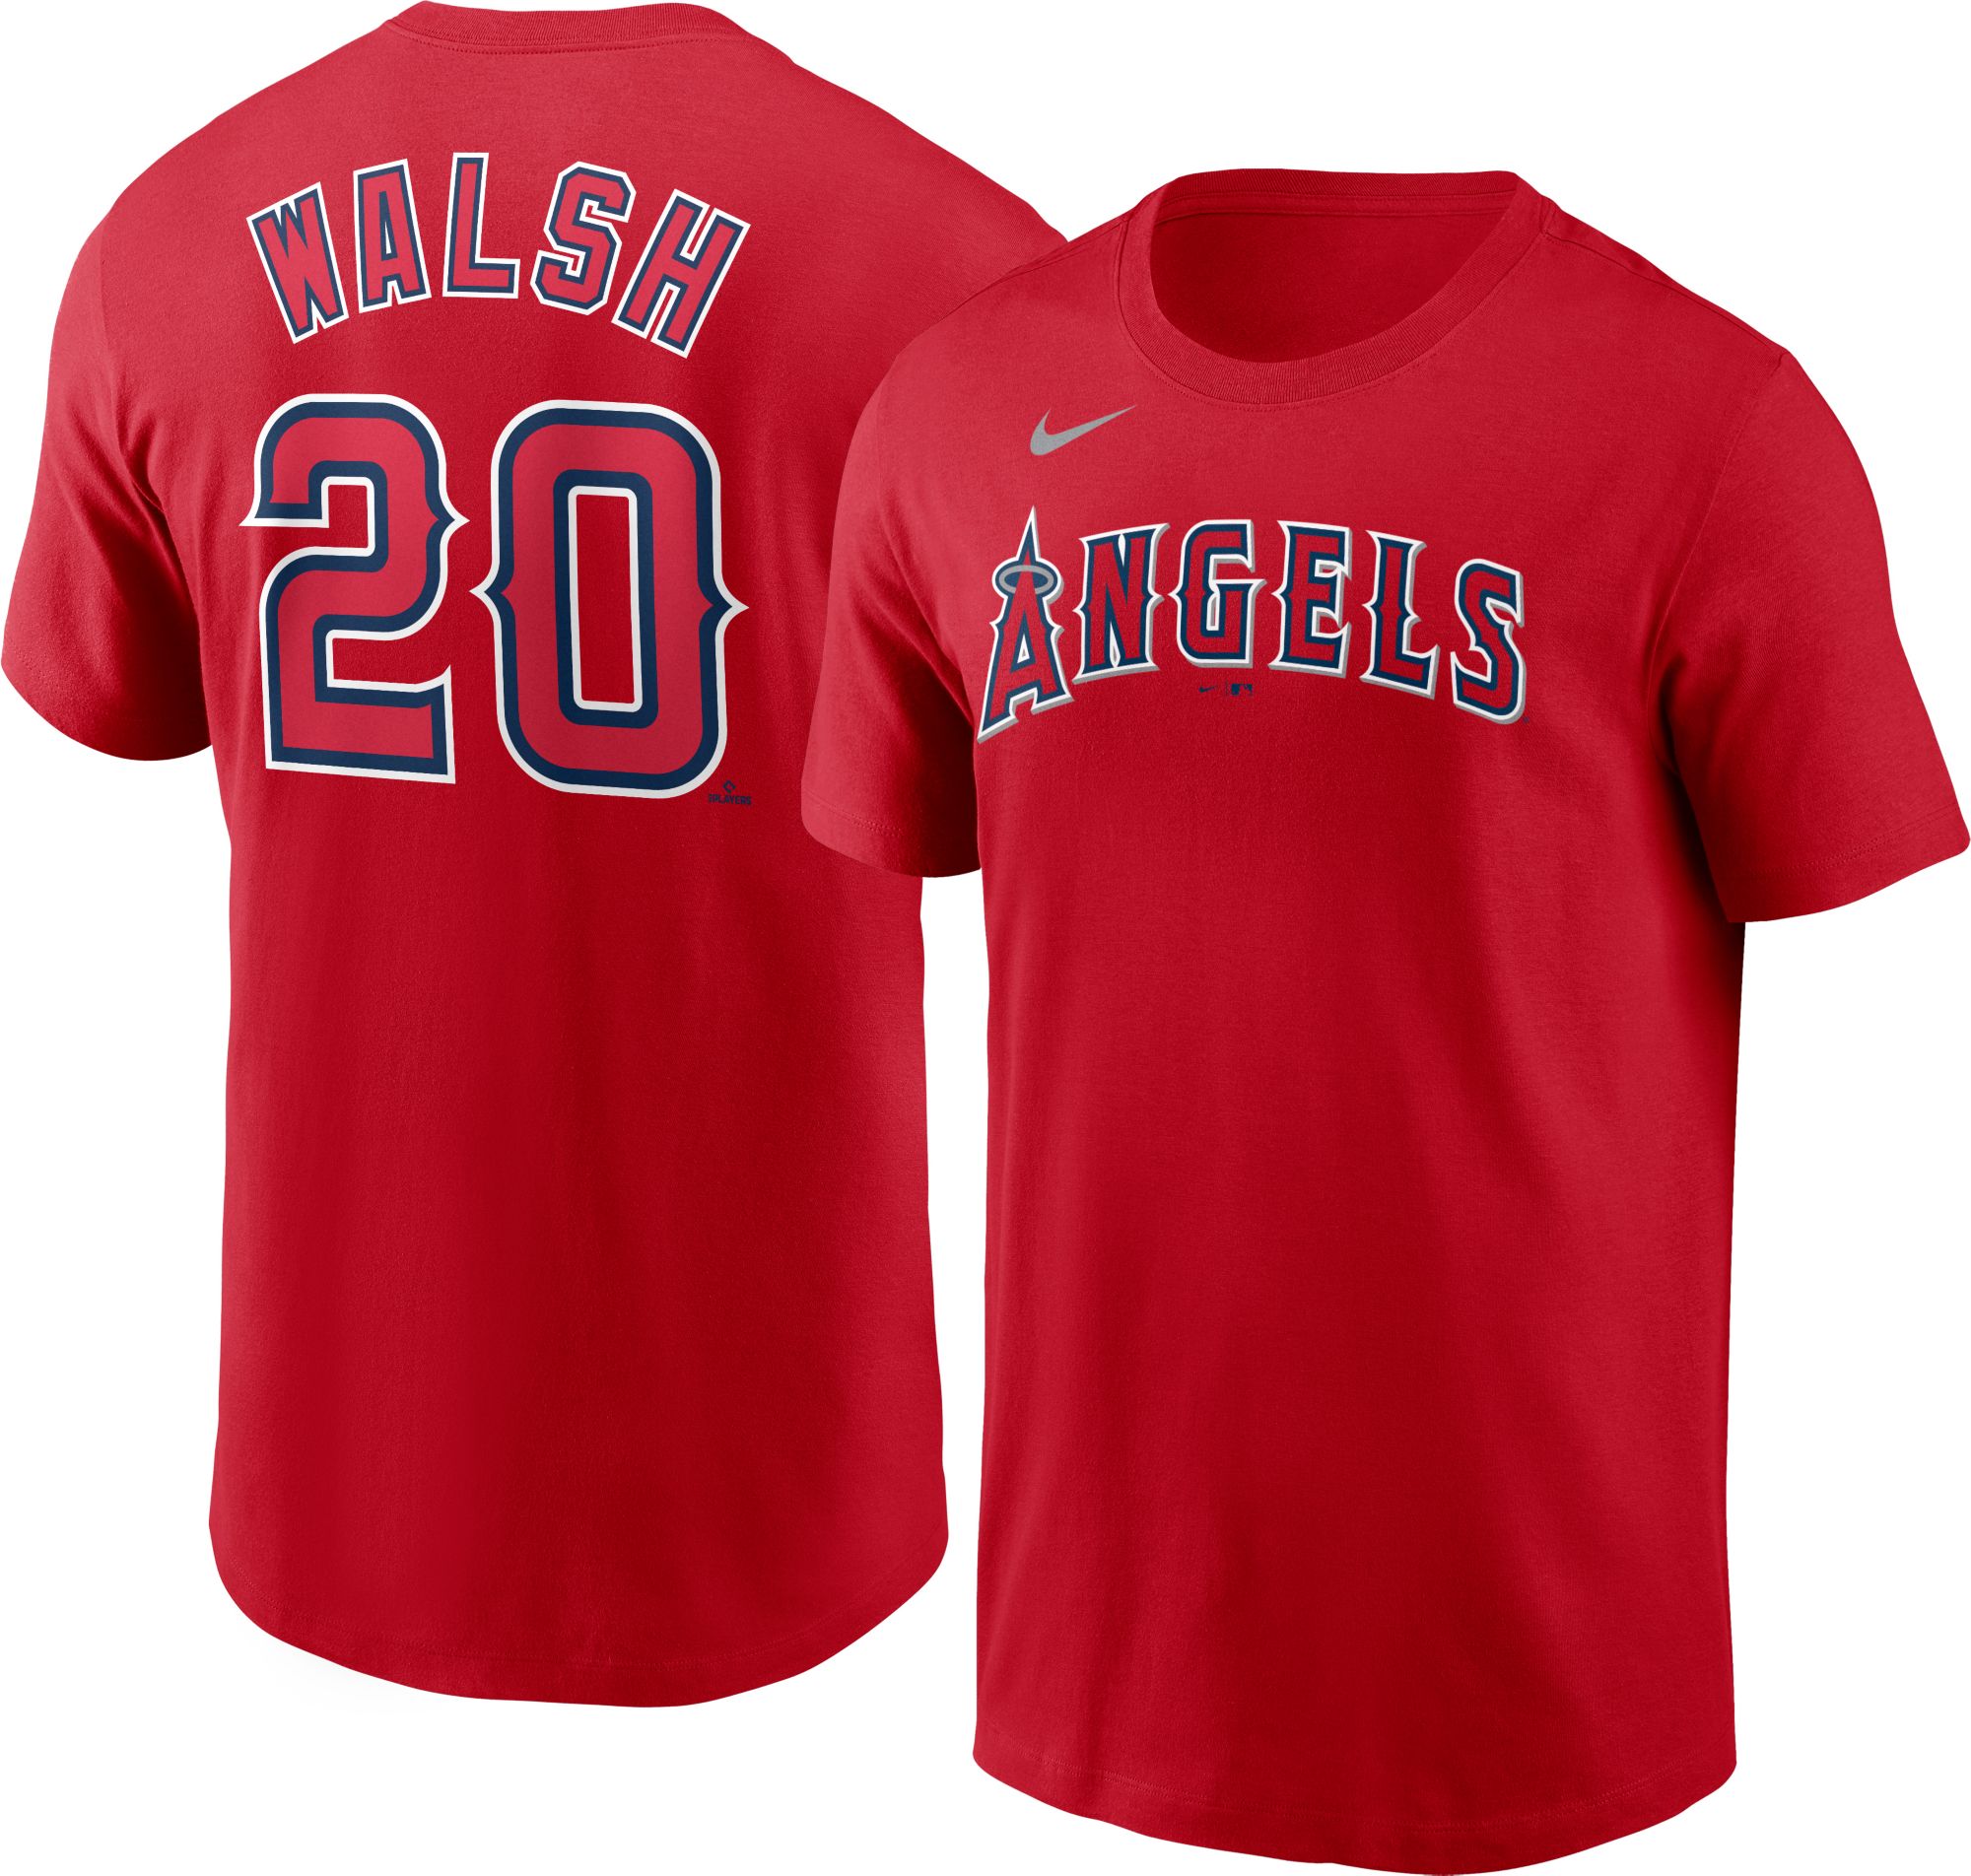  Outerstuff Shohei Ohtani #17 Los Angeles Angels Home White  Jersey - Youth Boys (8-20) (as1, Numeric, Numeric_8, Regular, Home White,  Youth Small (8)) : Sports & Outdoors